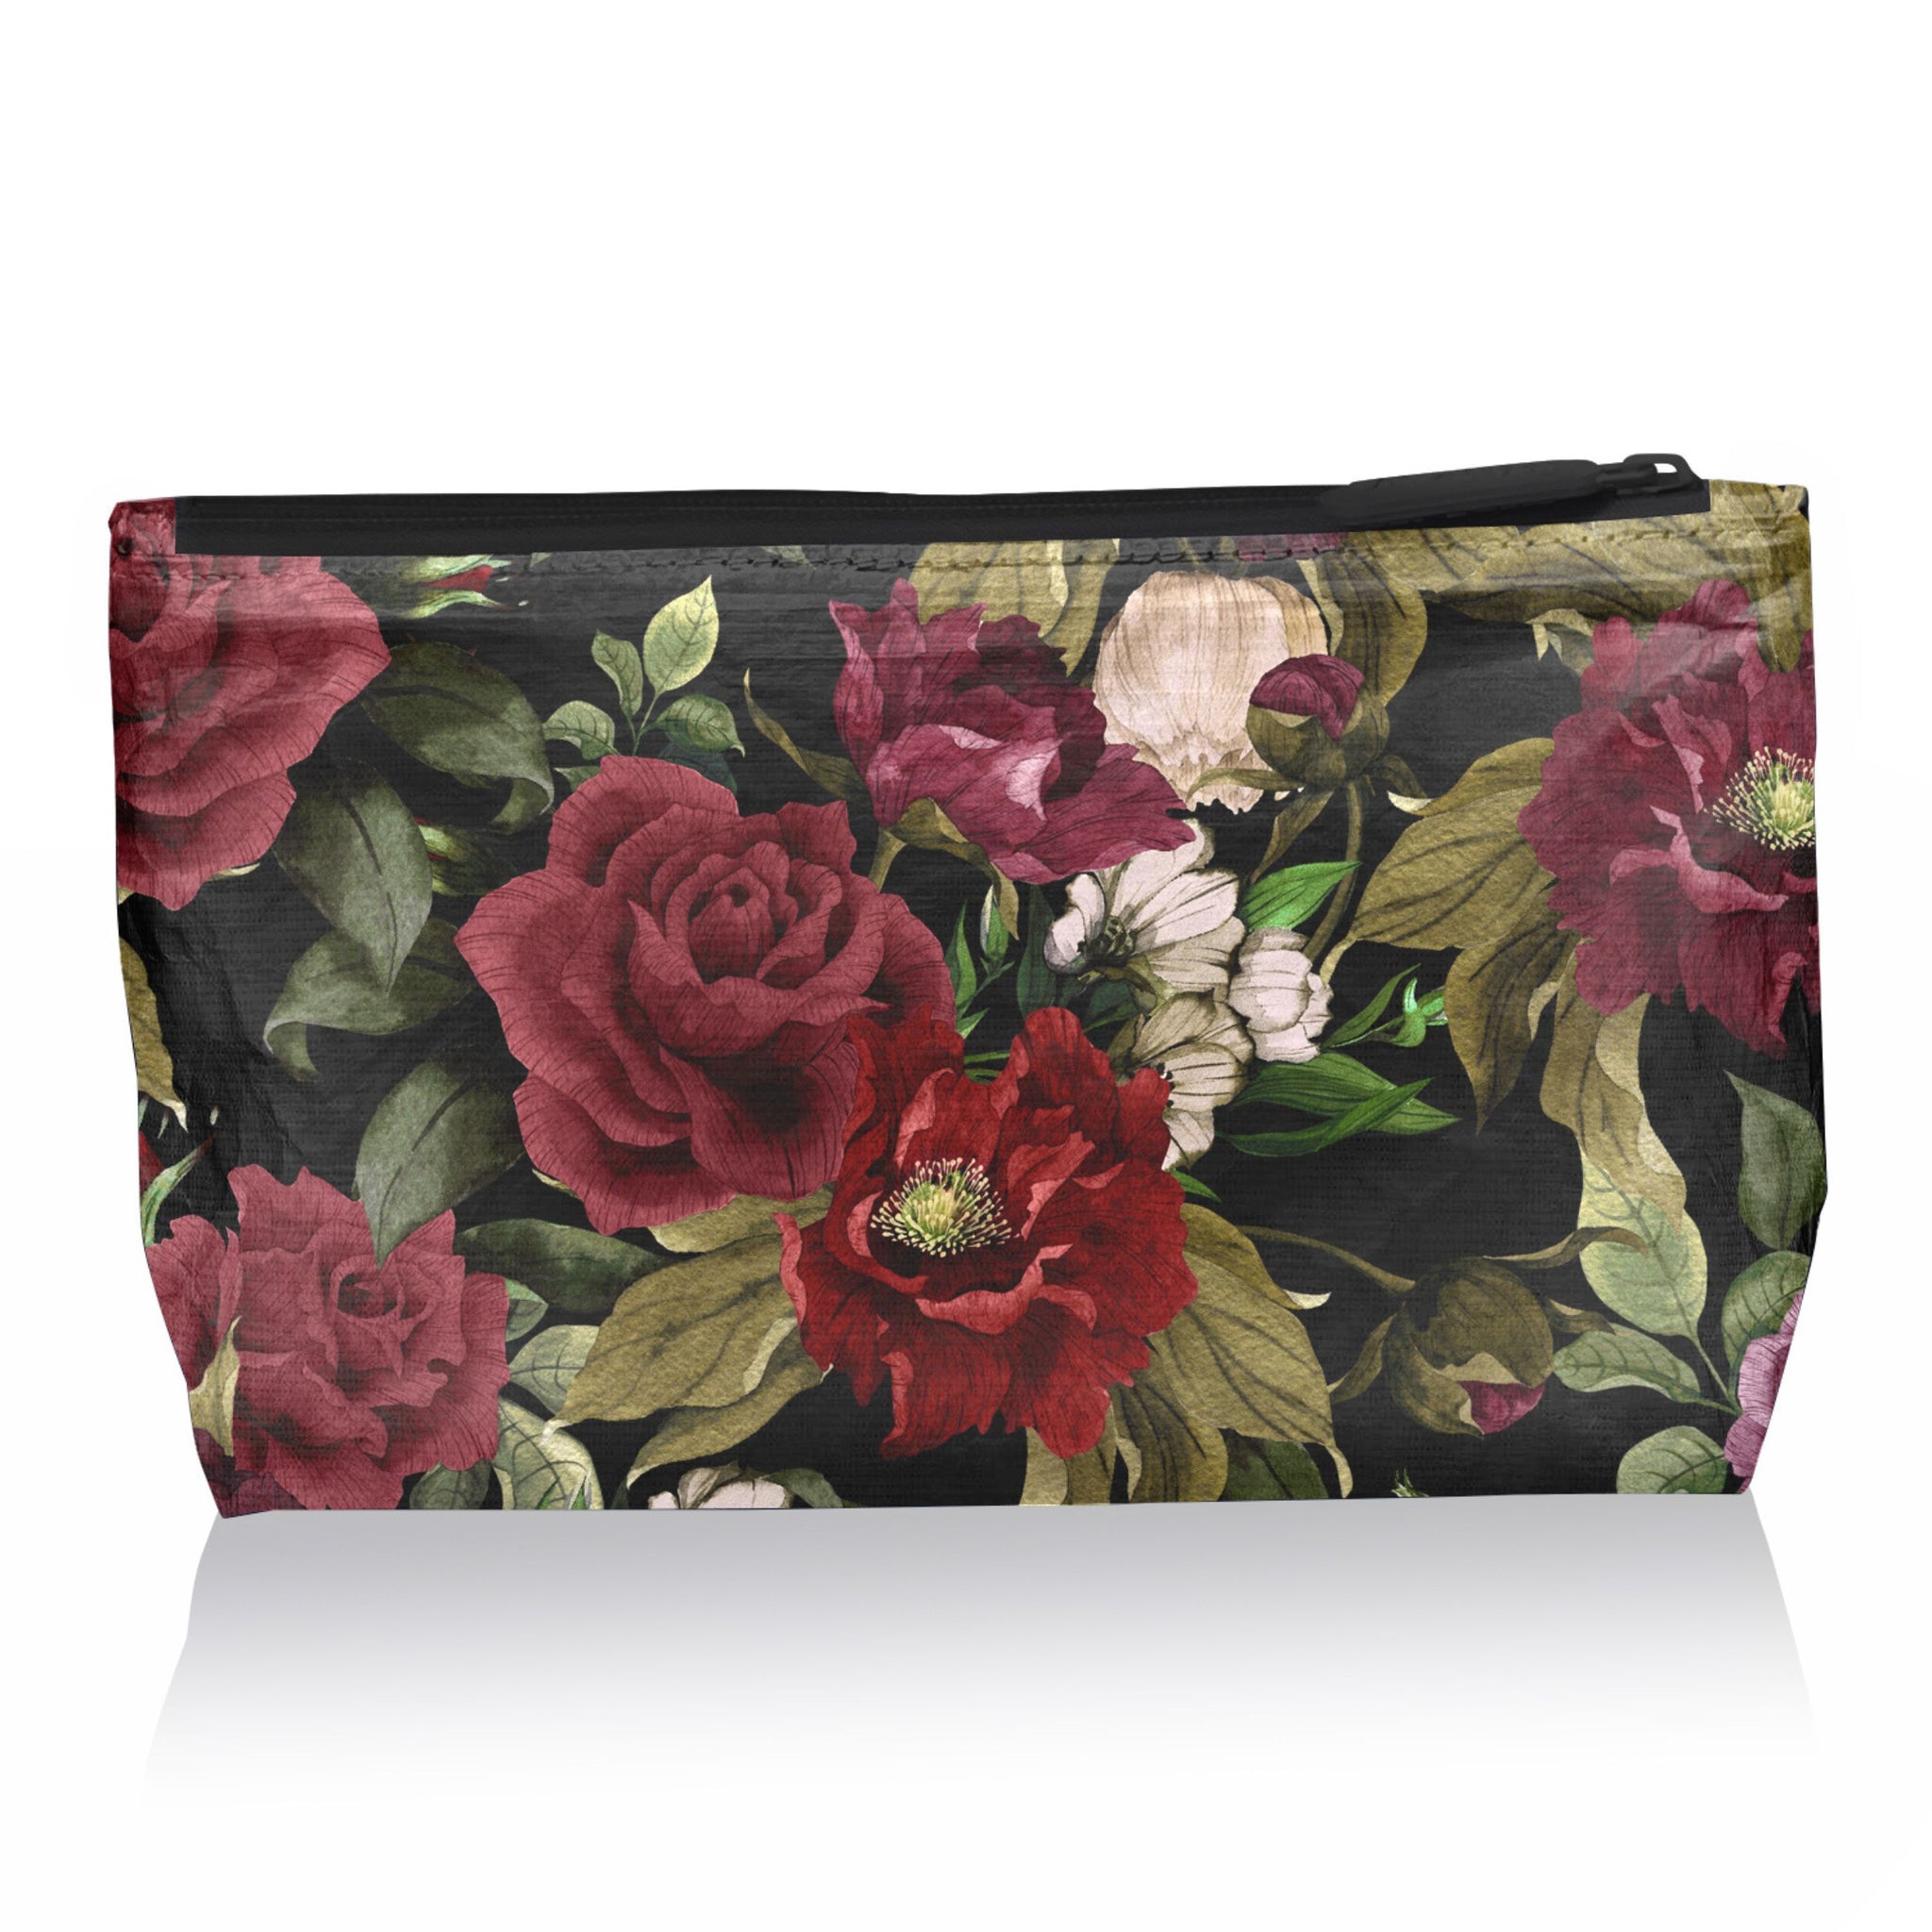 Cosmetic pouch in cabernet and cream floral 